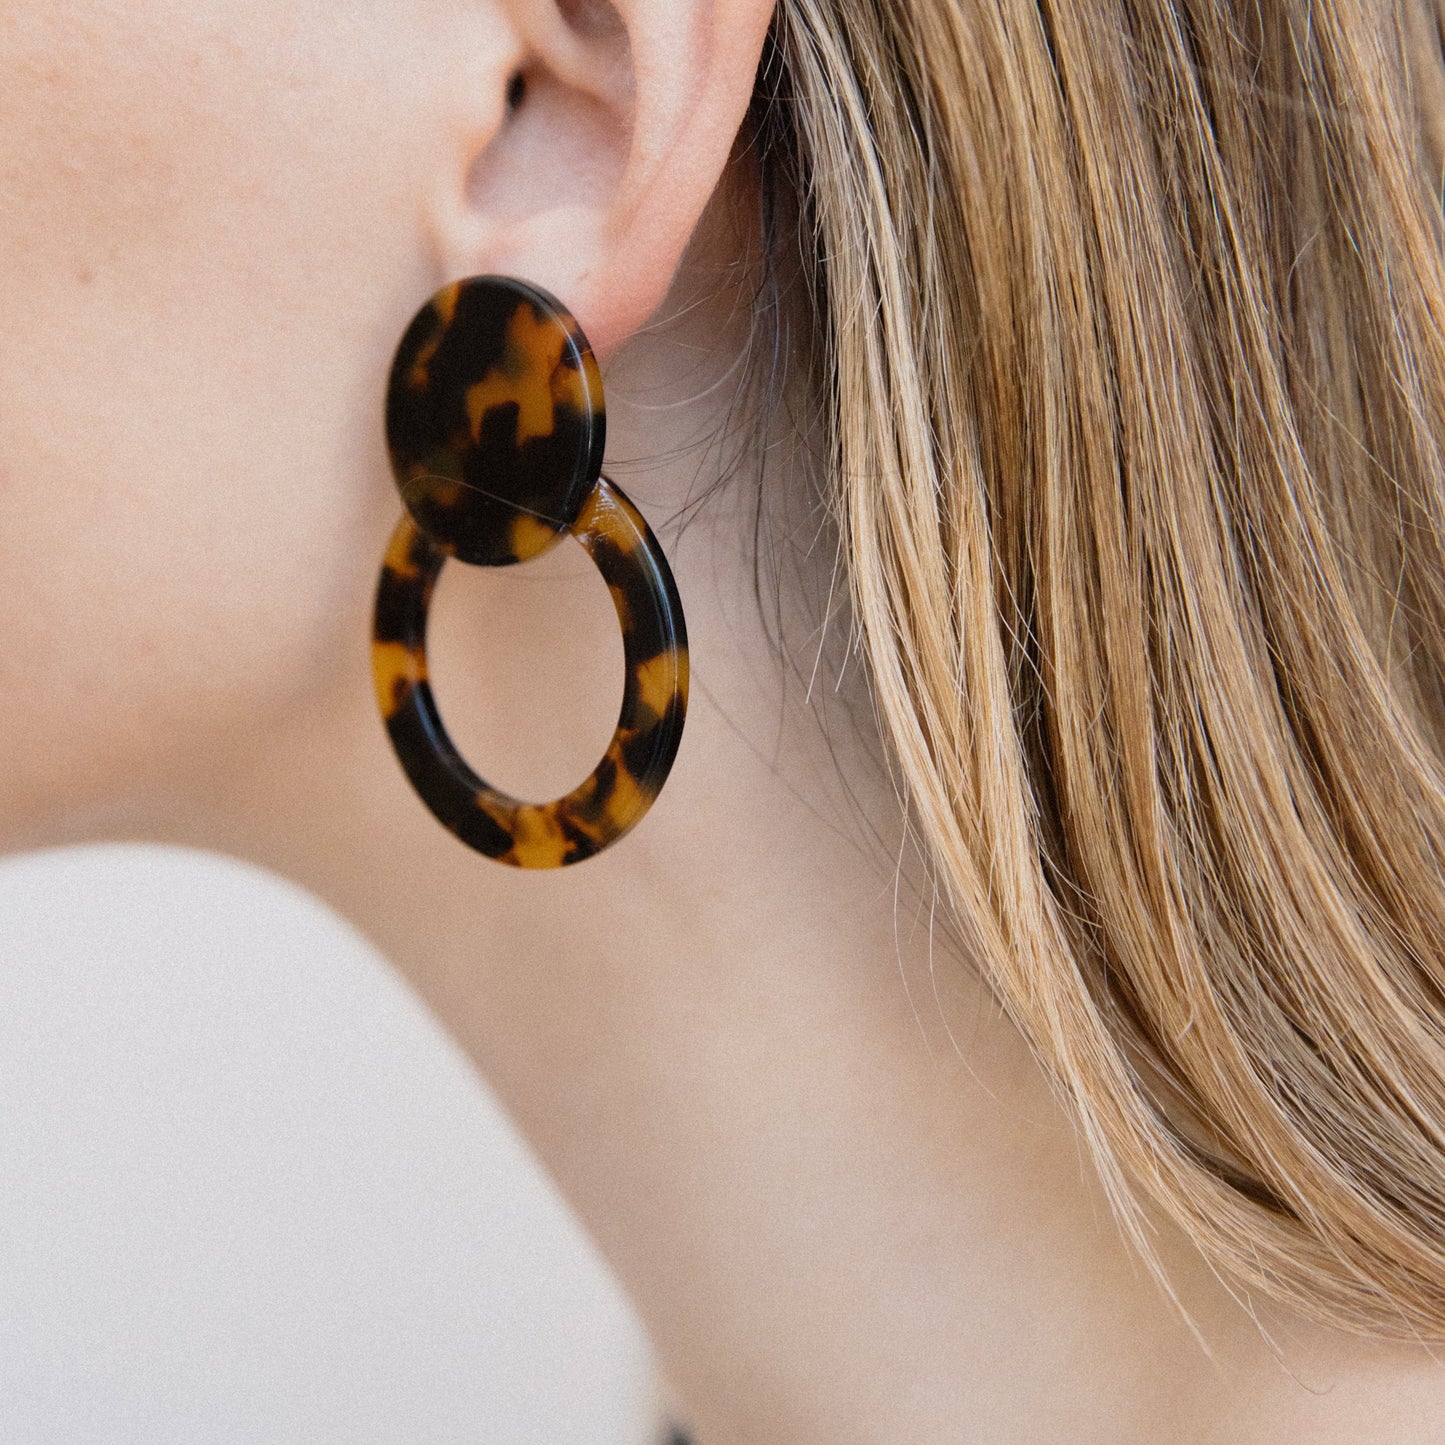 Chocolate Tortoise Double Circle Earrings - Closed Caption | Shop Vintage + Handmade. Always Sustainable. Never Wasteful.